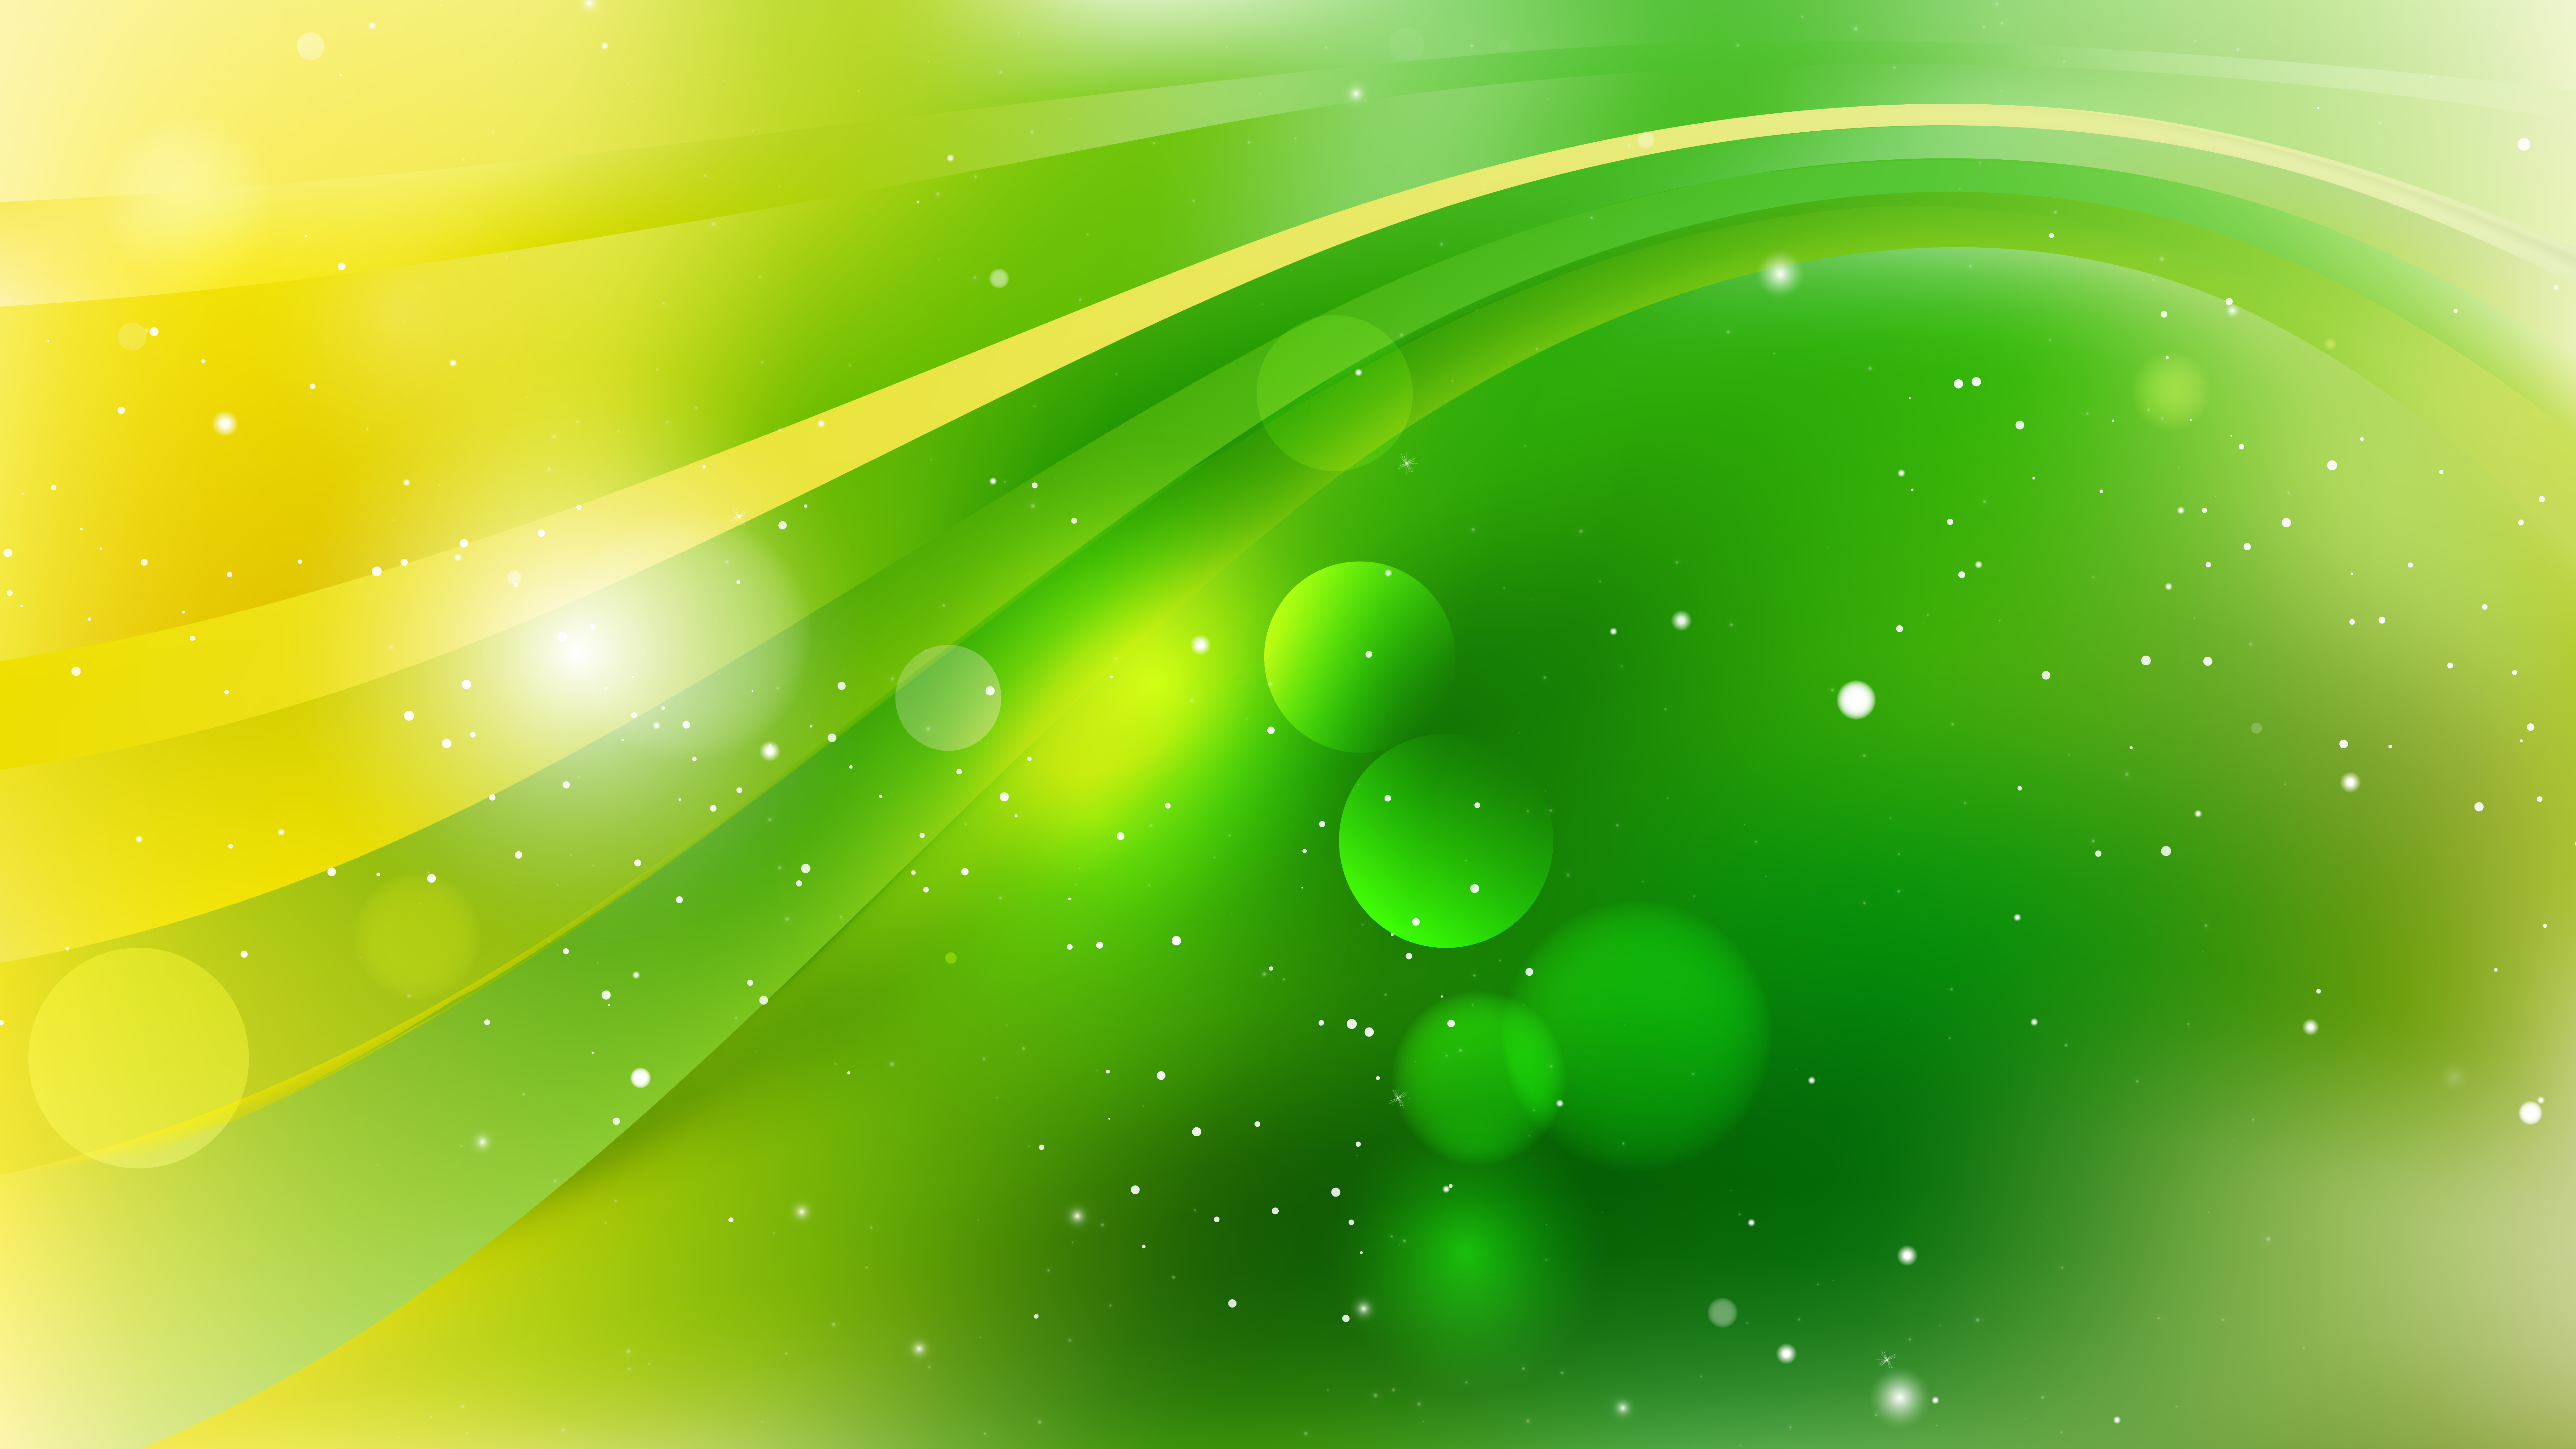 Free Green and Yellow Abstract Background Illustration